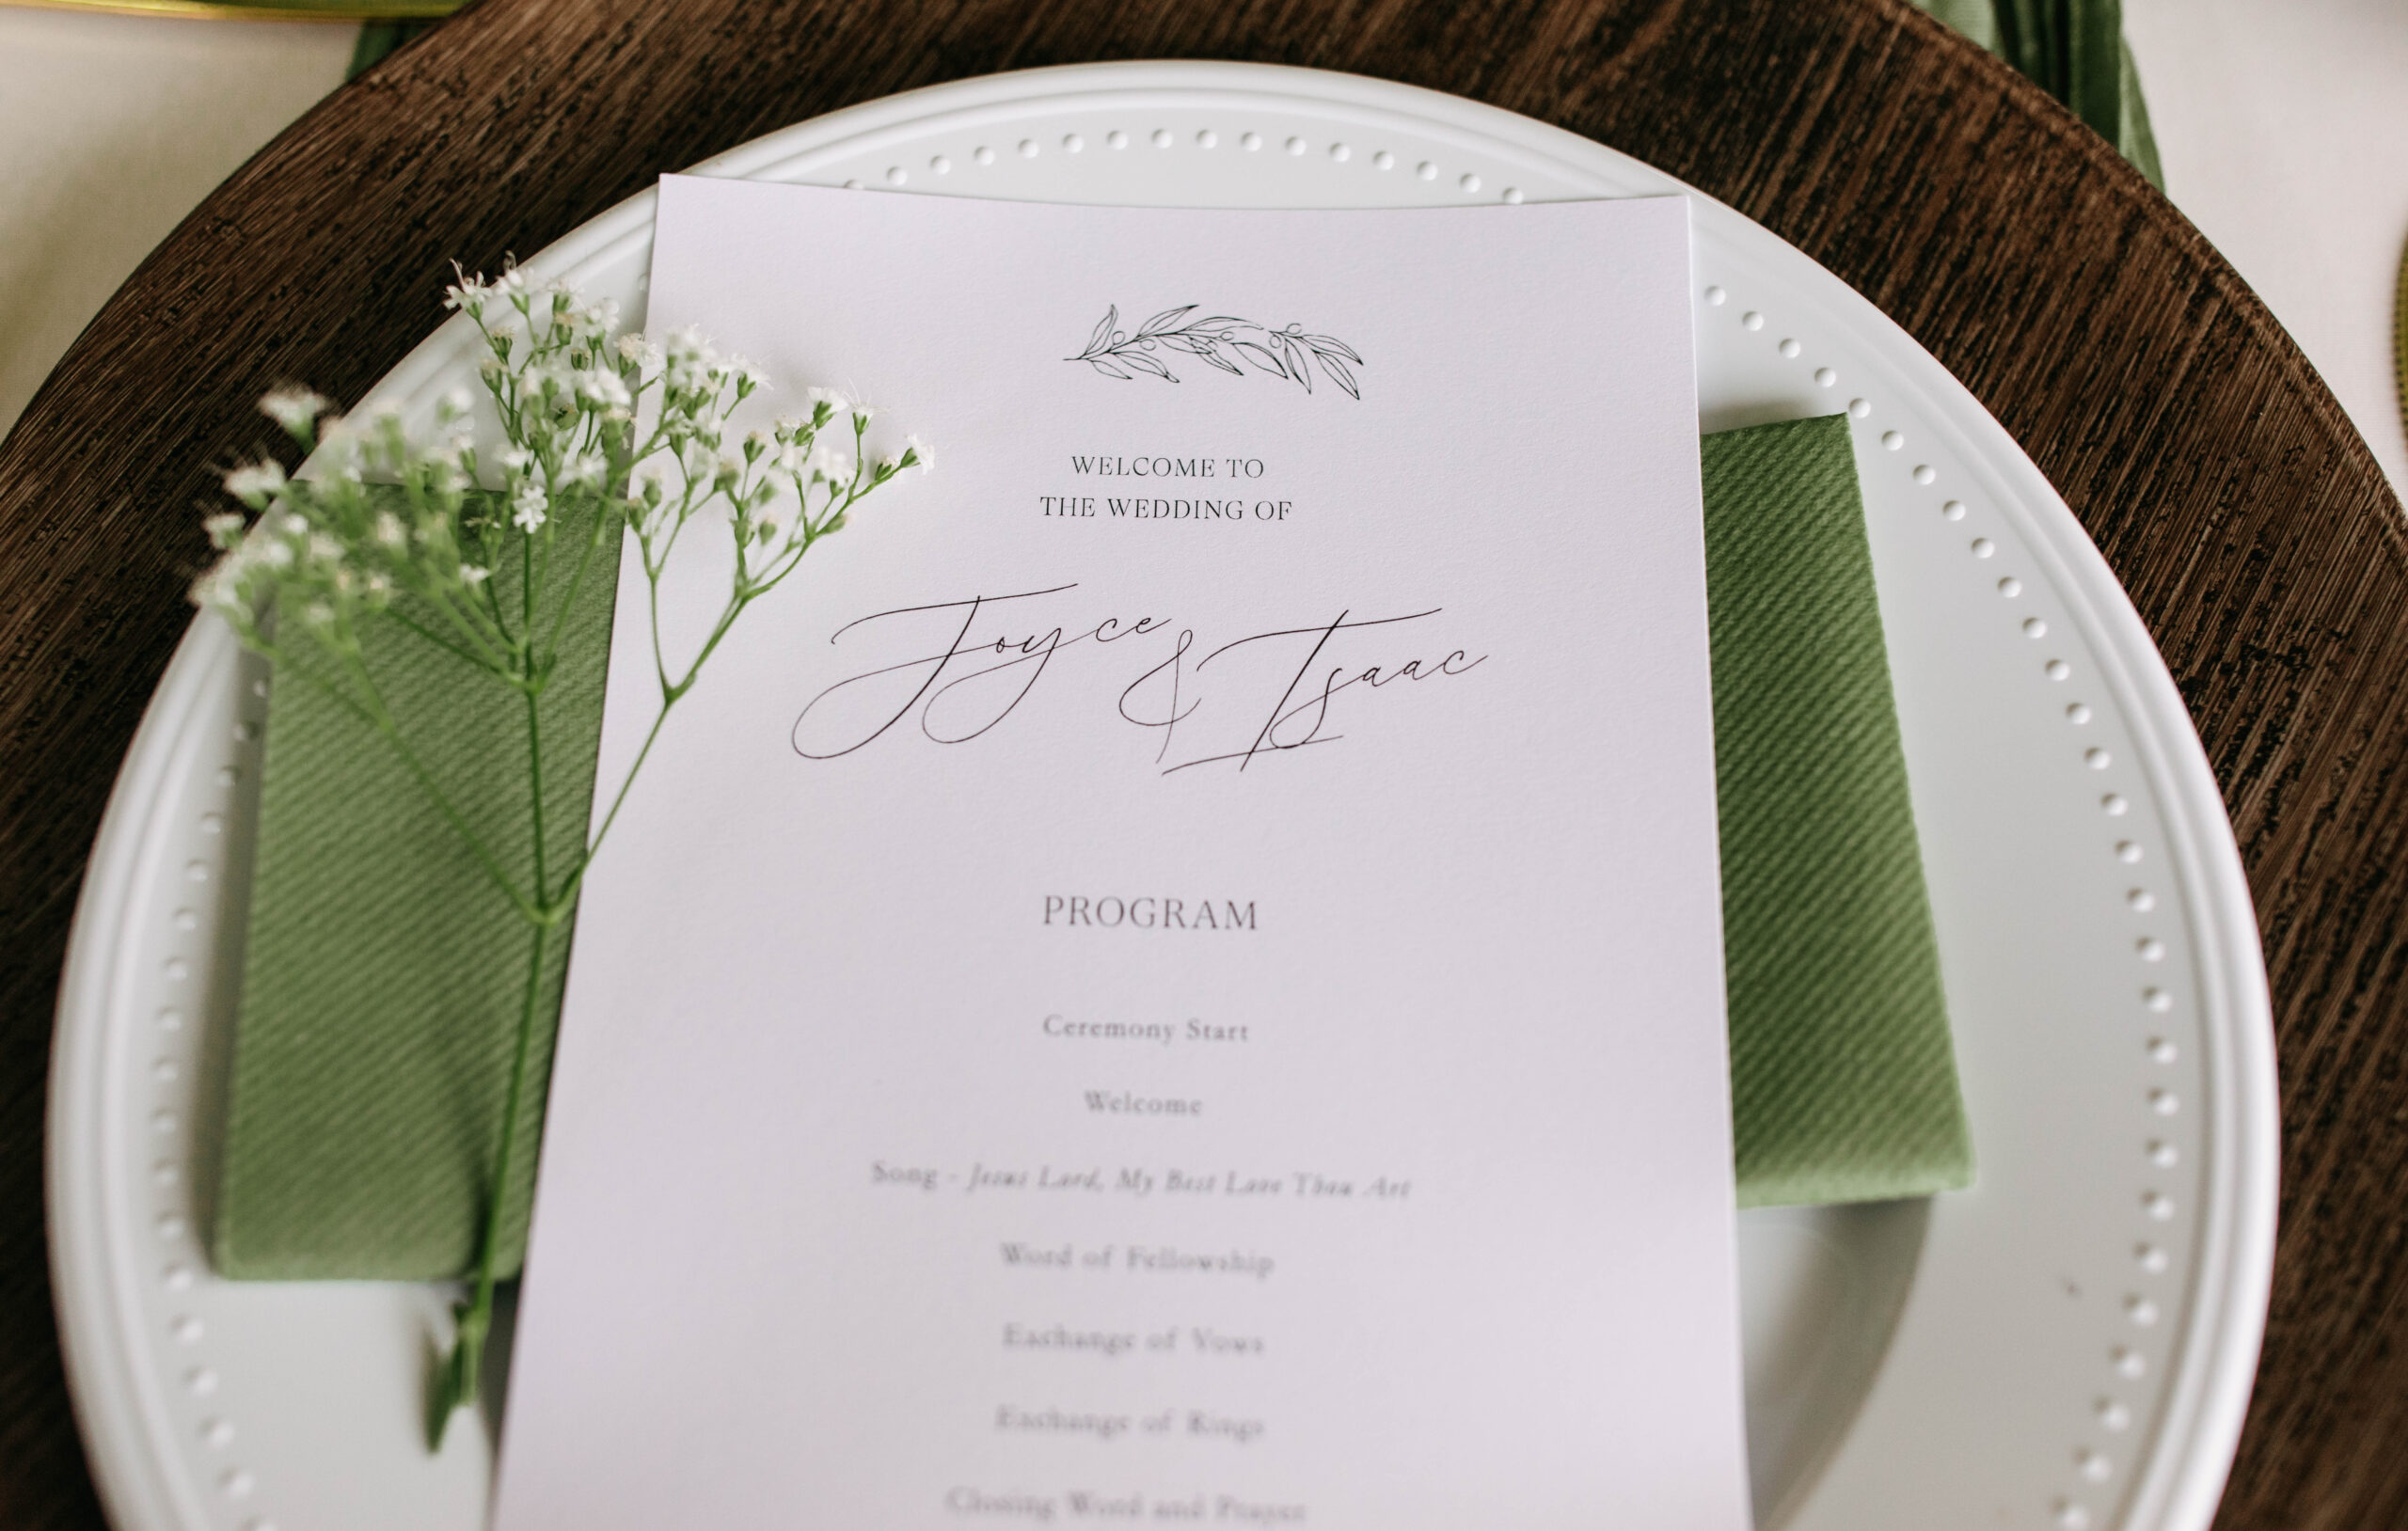 An up close photograph of a wedding program on a place setting at a wedding reception. The wedding was an Austin wedding at Bear Creek Retreat. The reception place setting has green napkins and baby breath.